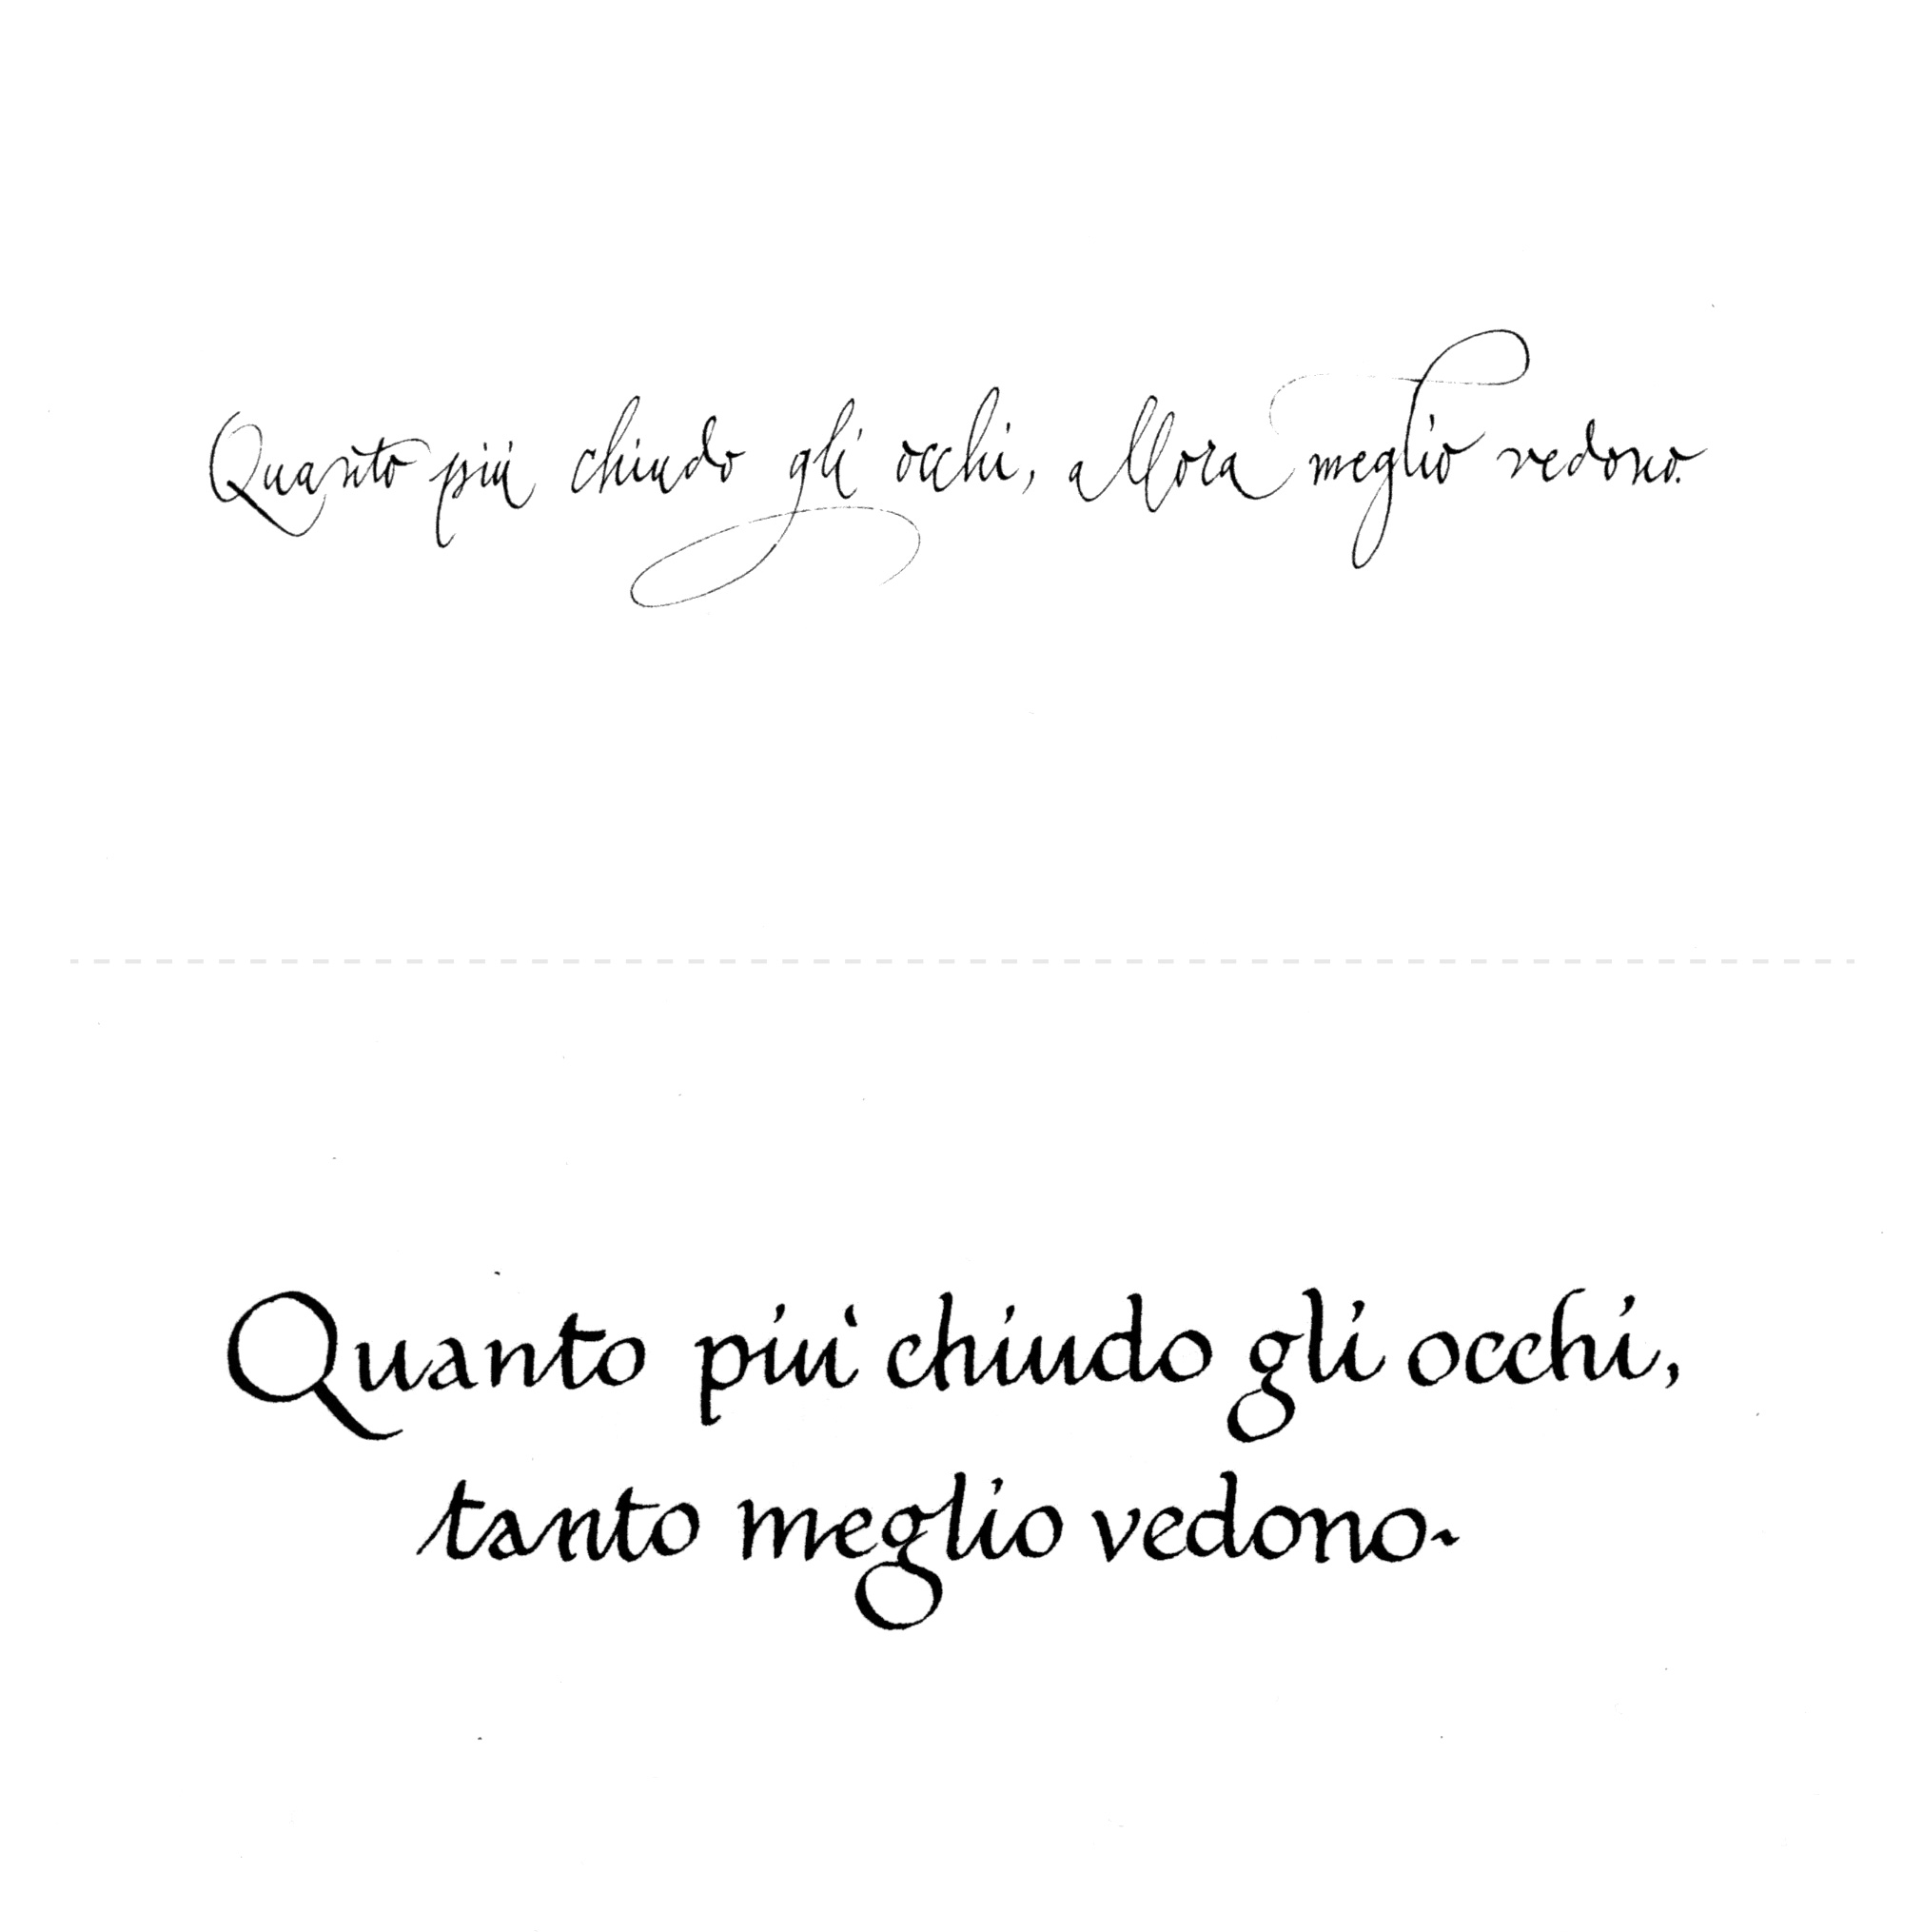 <p><strong> Stili calligrafici</strong> 
<br> Personal Project</p>
